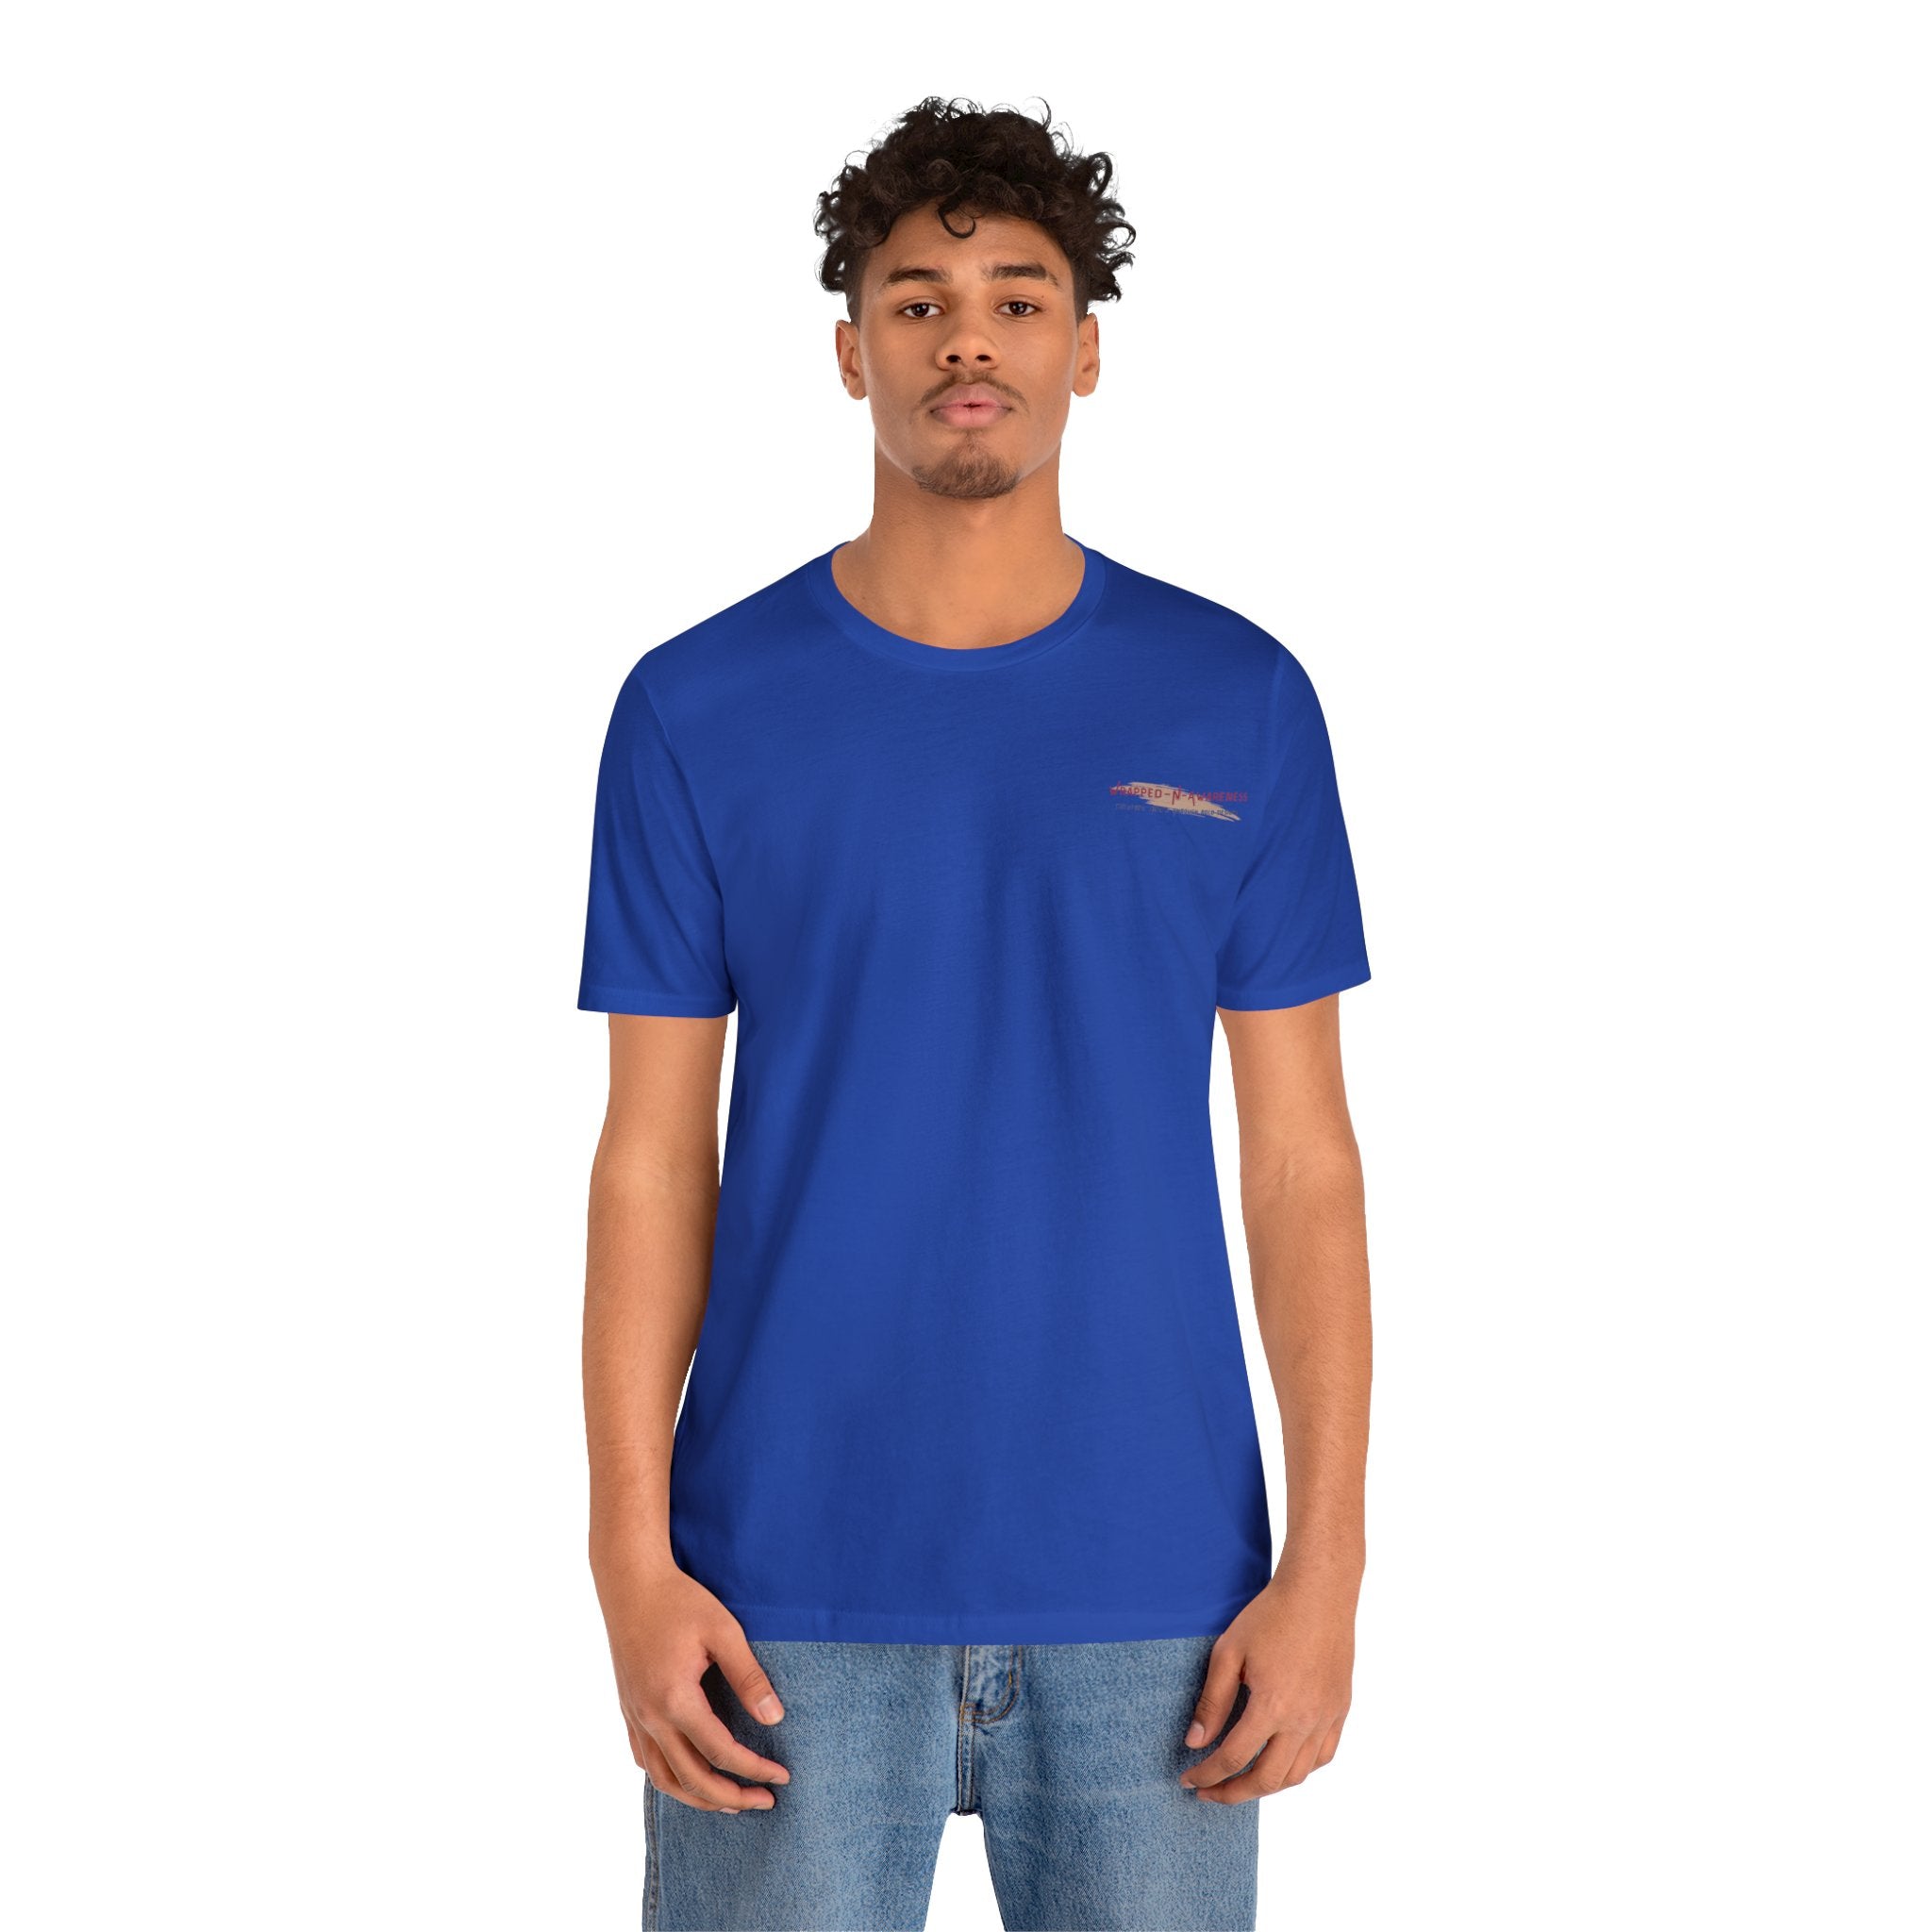 Wrapped-N-Awareness Jersey Tee Bella+Canvas 3001 True Royal Classic Tee Comfortable Tee Cotton T-Shirt Graphic Tee JerseyTee Statement Shirt T-shirt Tee Unisex Apparel T-Shirt 3134701774423063127_2048 Printify